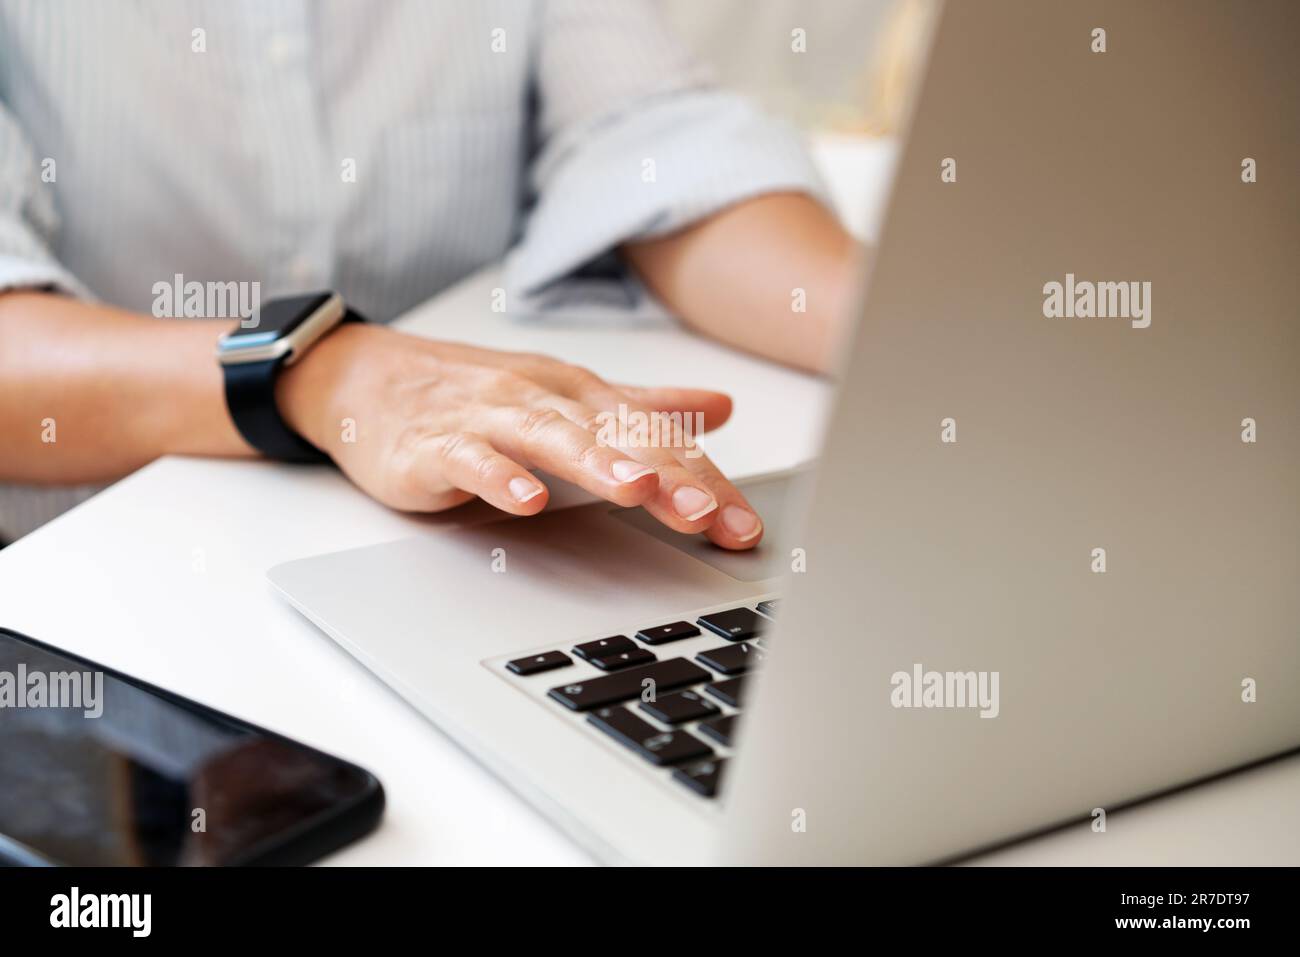 Close up photo of females fingers on the touchpad of laptop, woman business person using her laptop in the office. Stock Photo